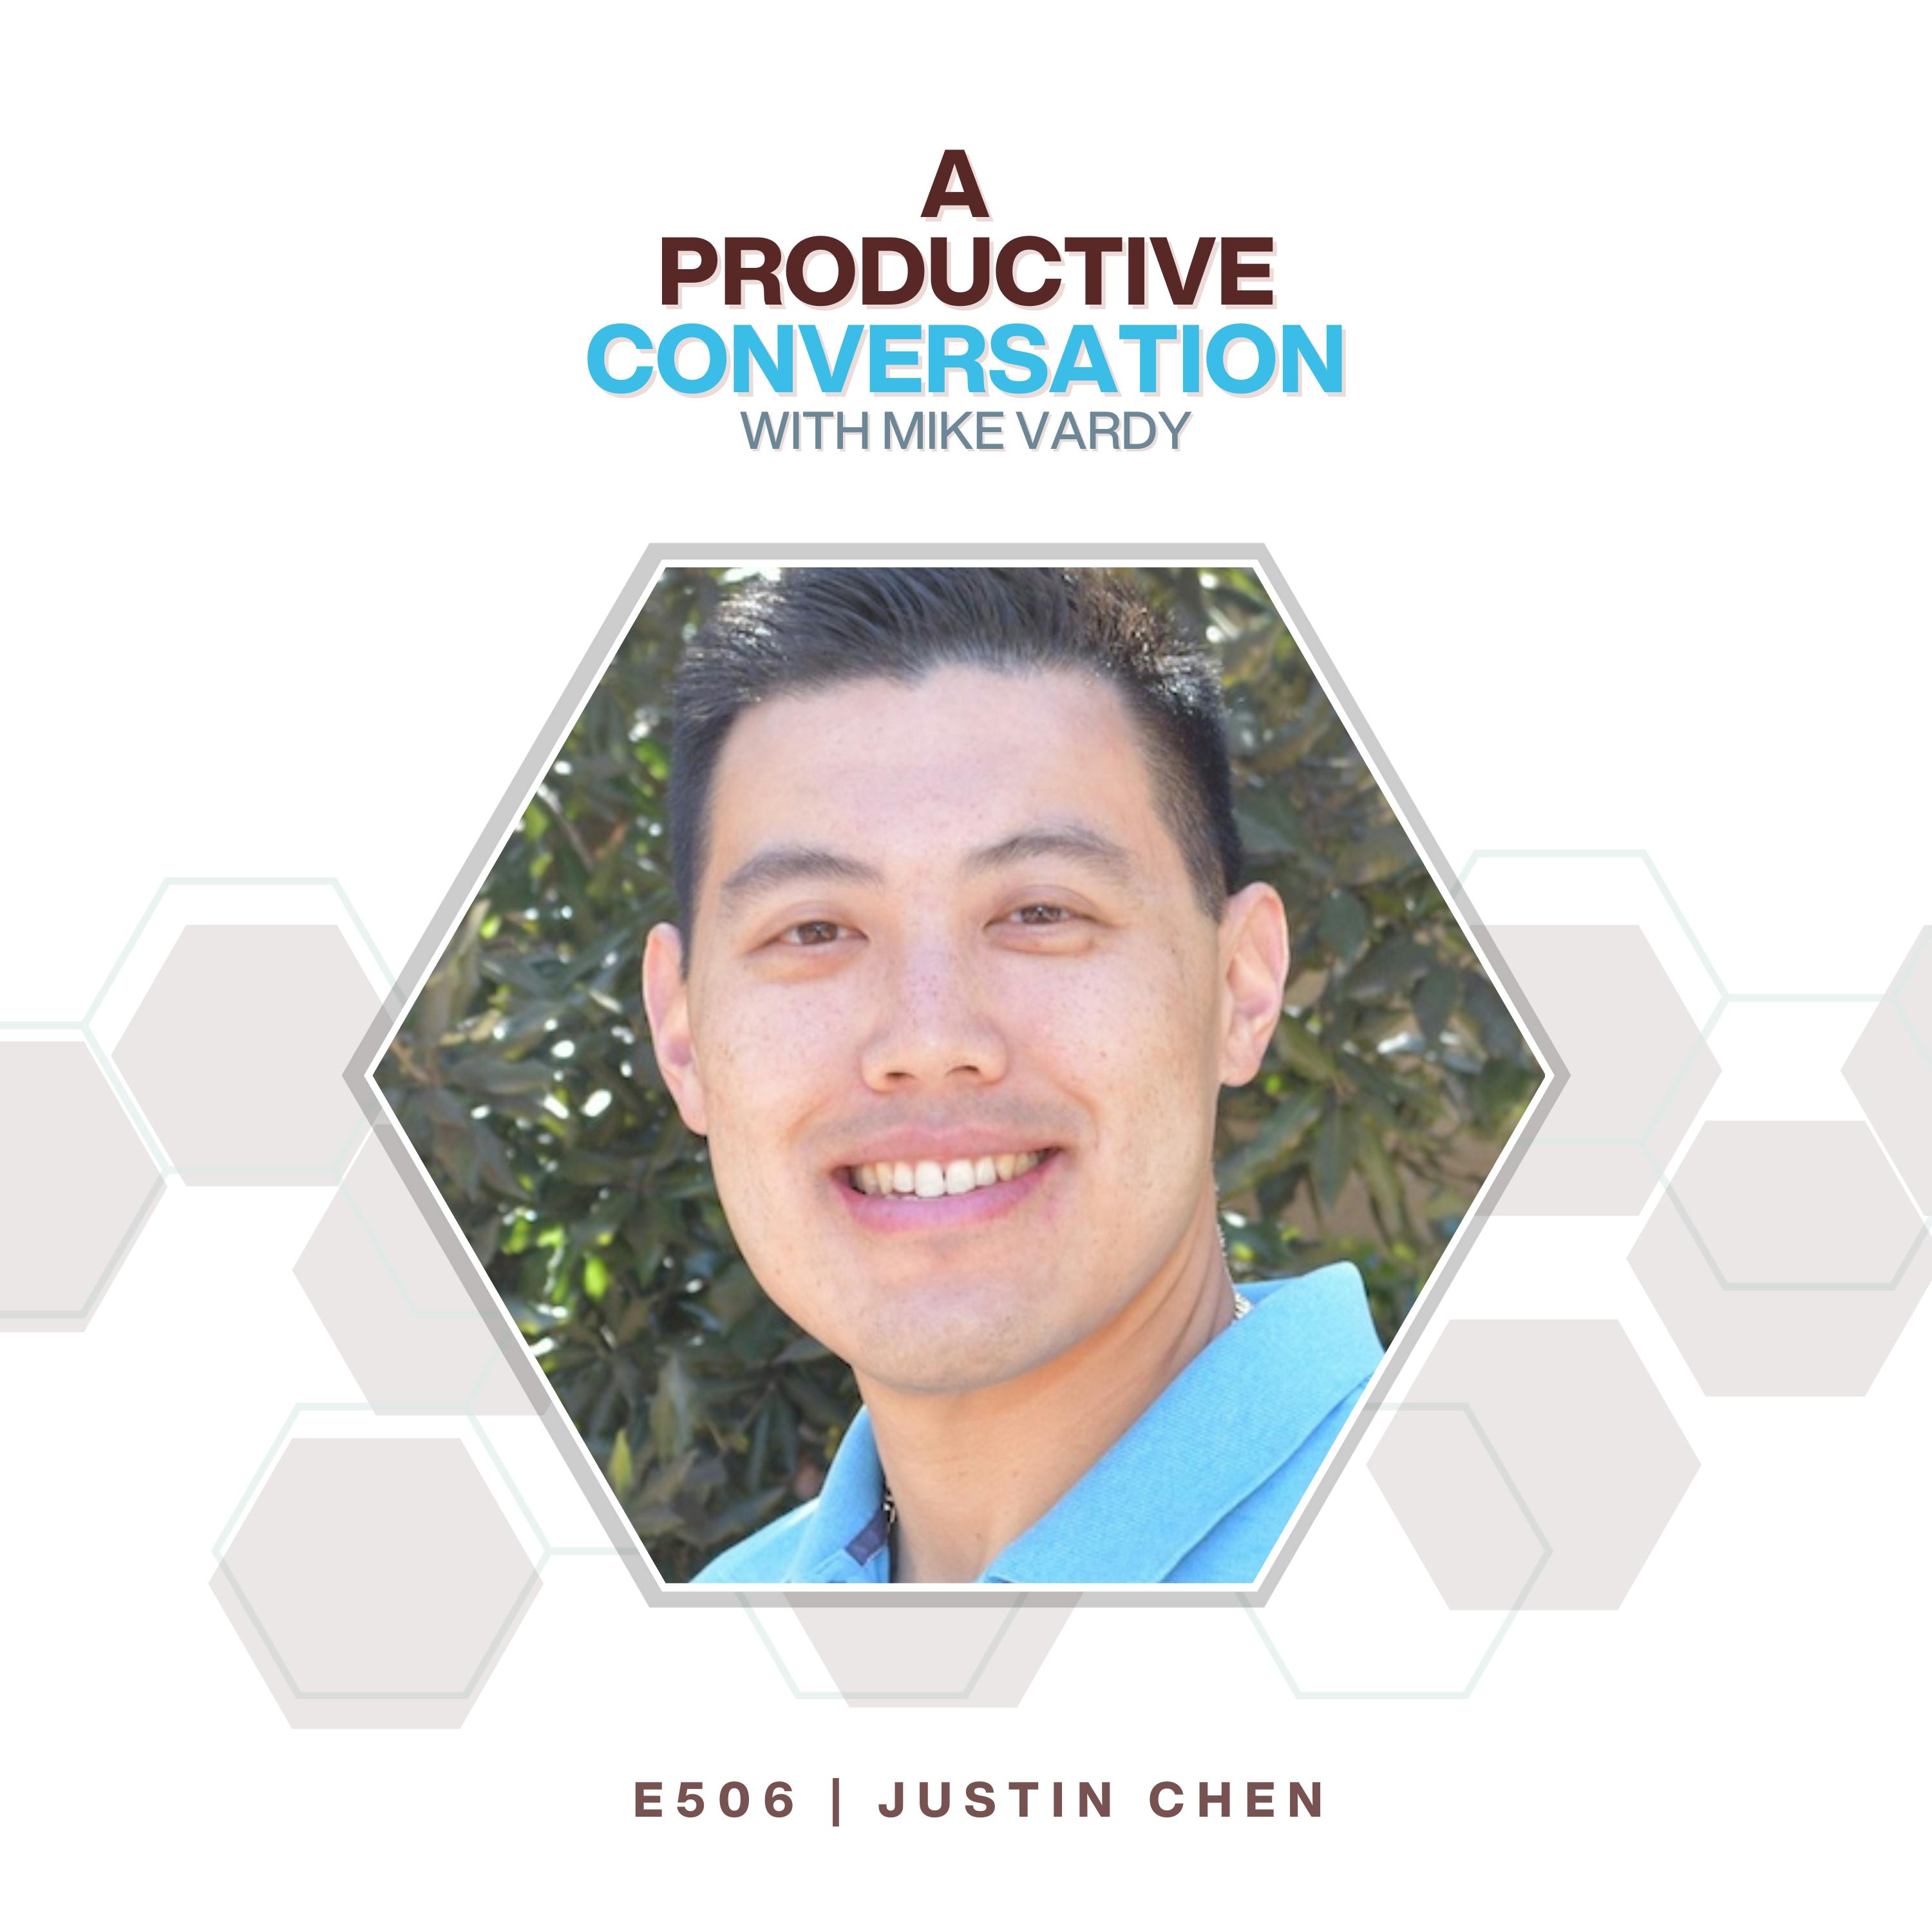 Justin Chen Talks About Harnessing Feedback for Entrepreneurial Success